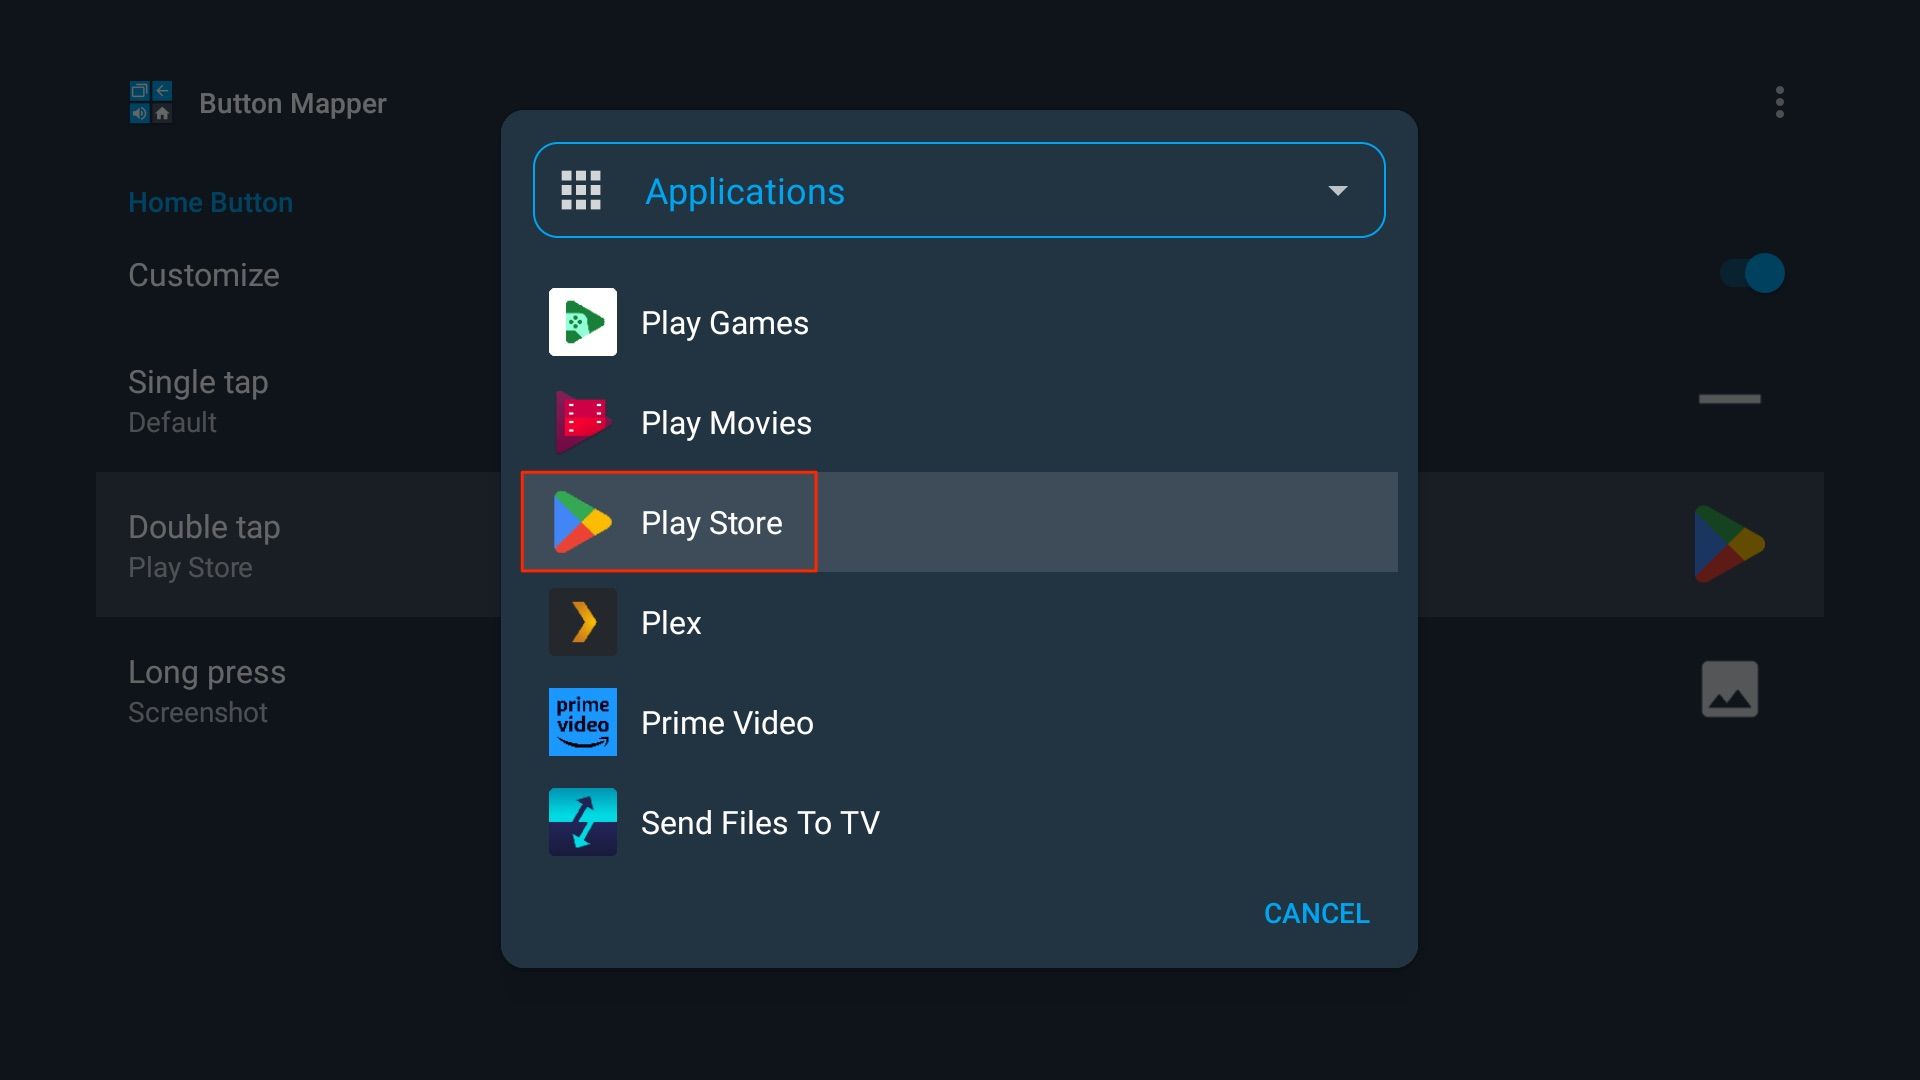 Button Mapper on Google TV opens Play Store with Home button